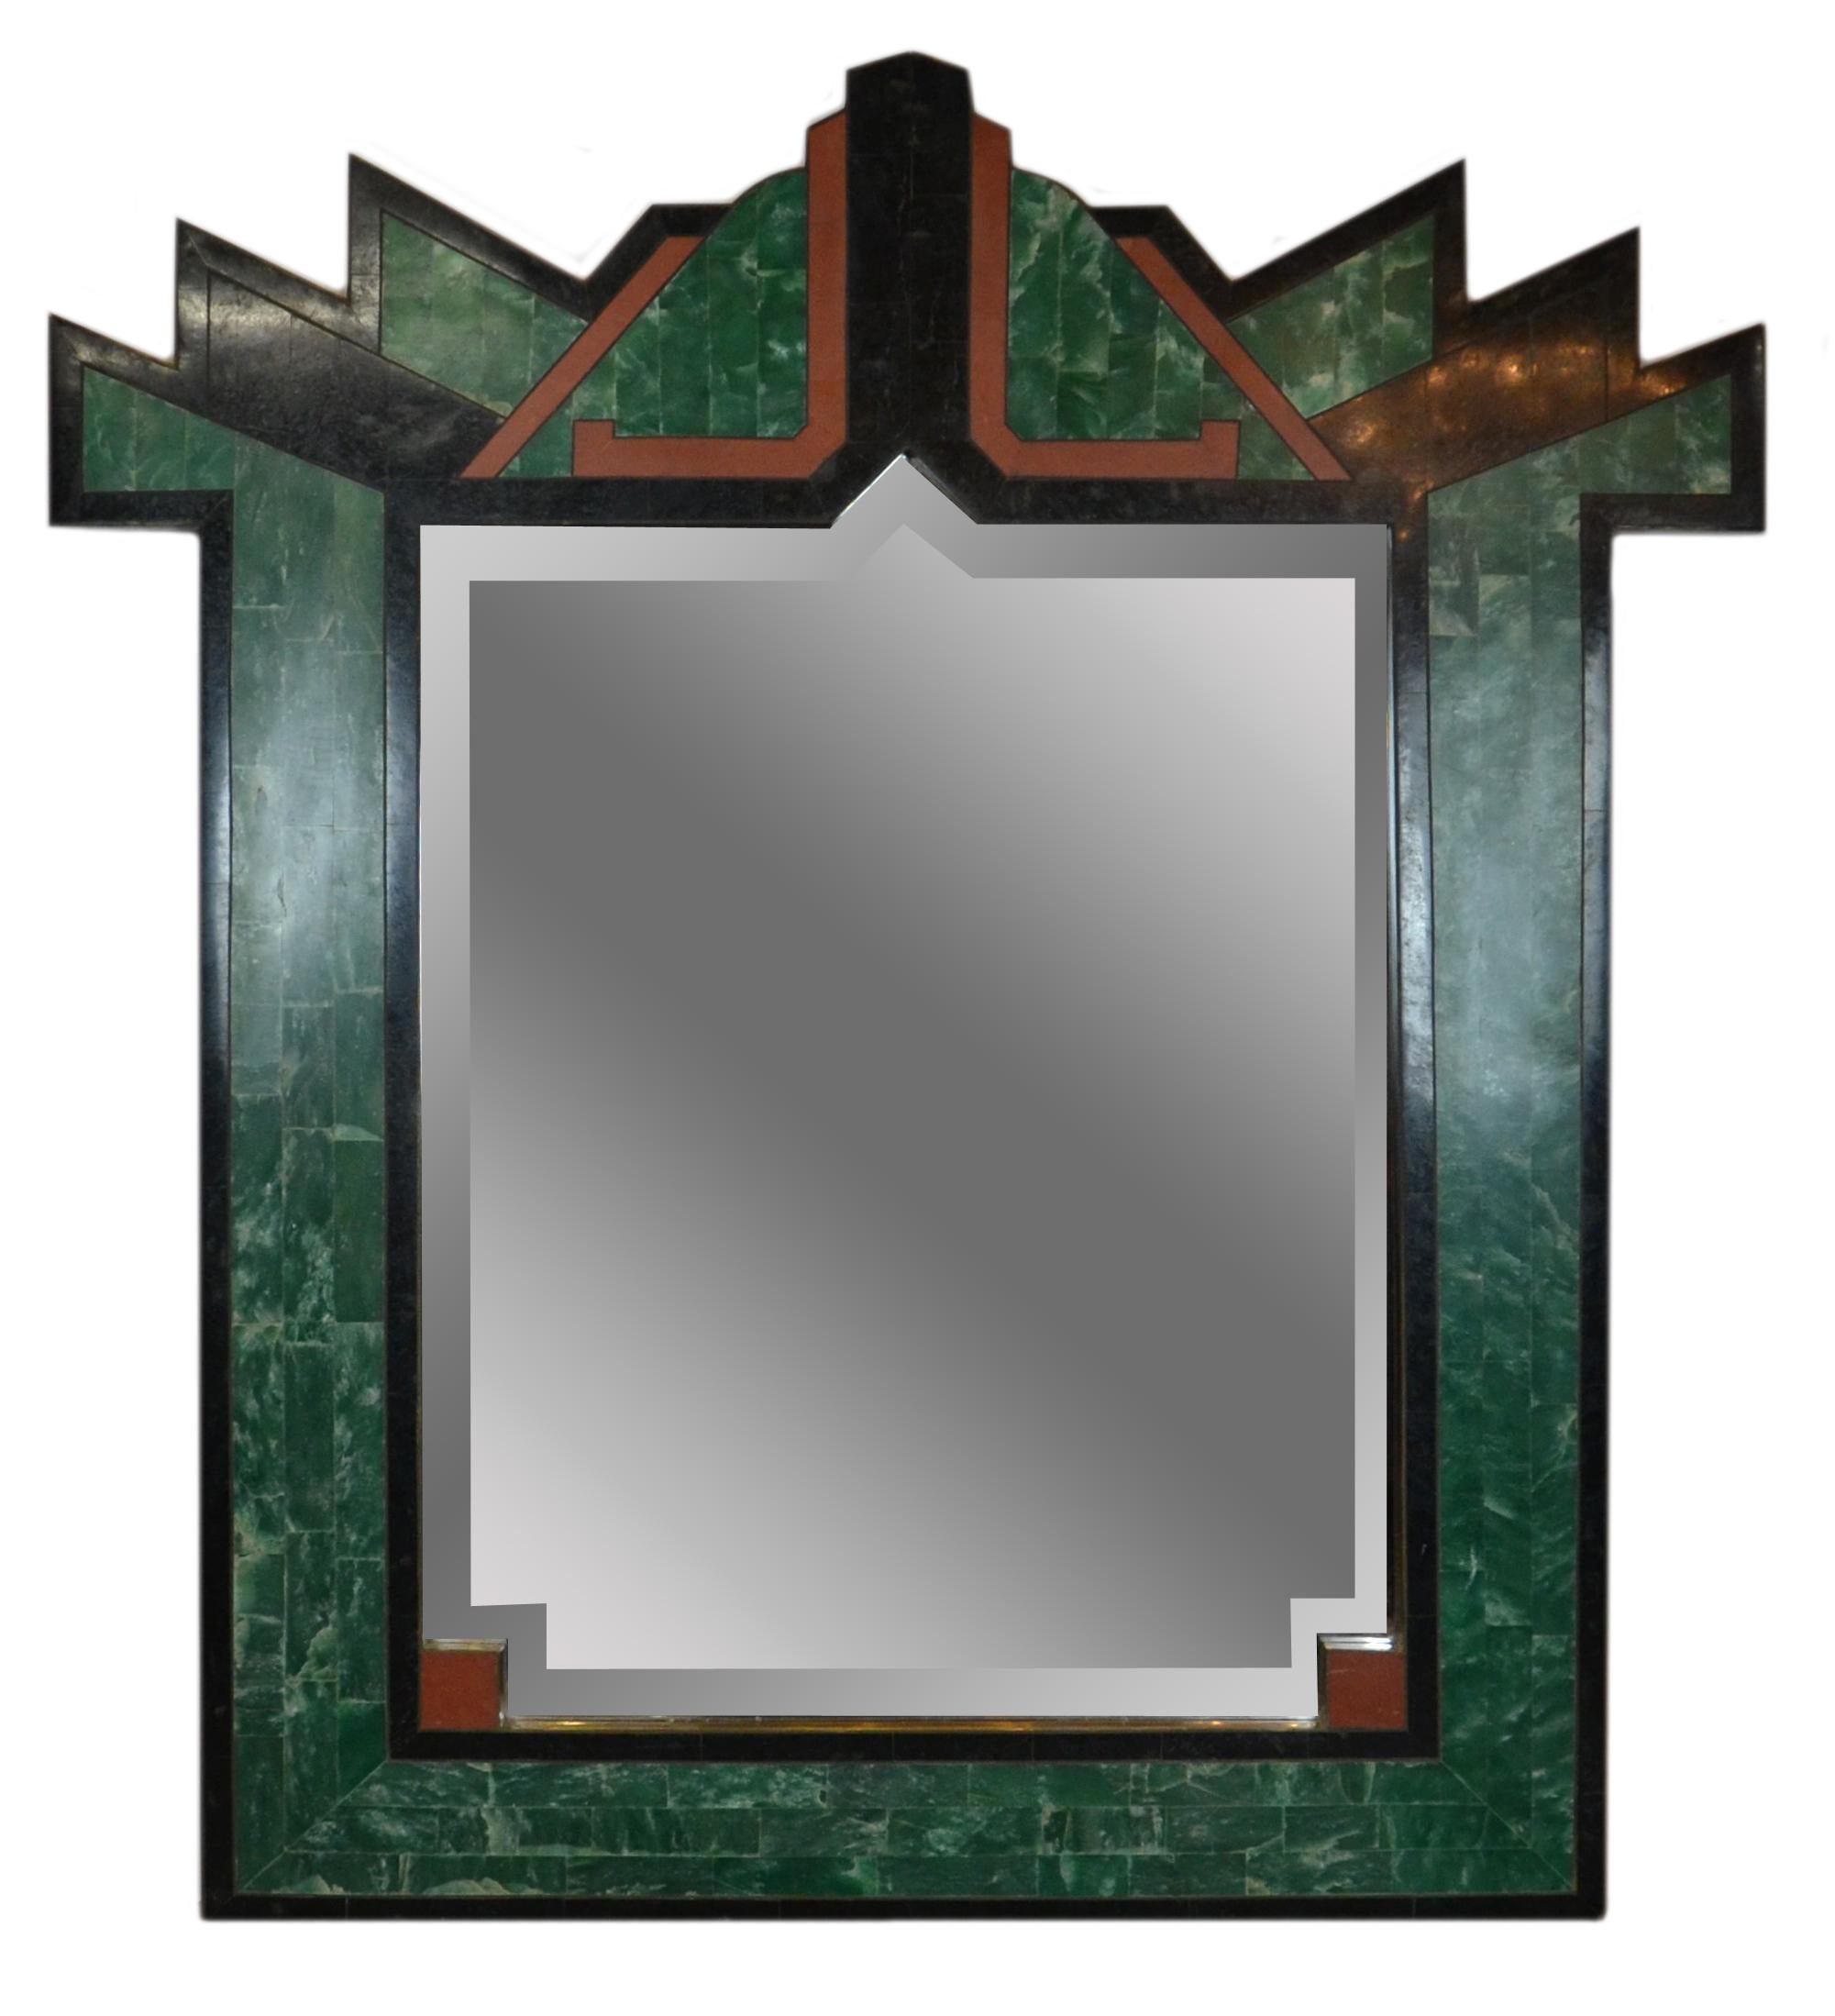 Italian Art Deco style mirror with green, black, orange-red color stones framed in solid brass. The mirror is cut in the shape of the frame with a beveled edge.
 